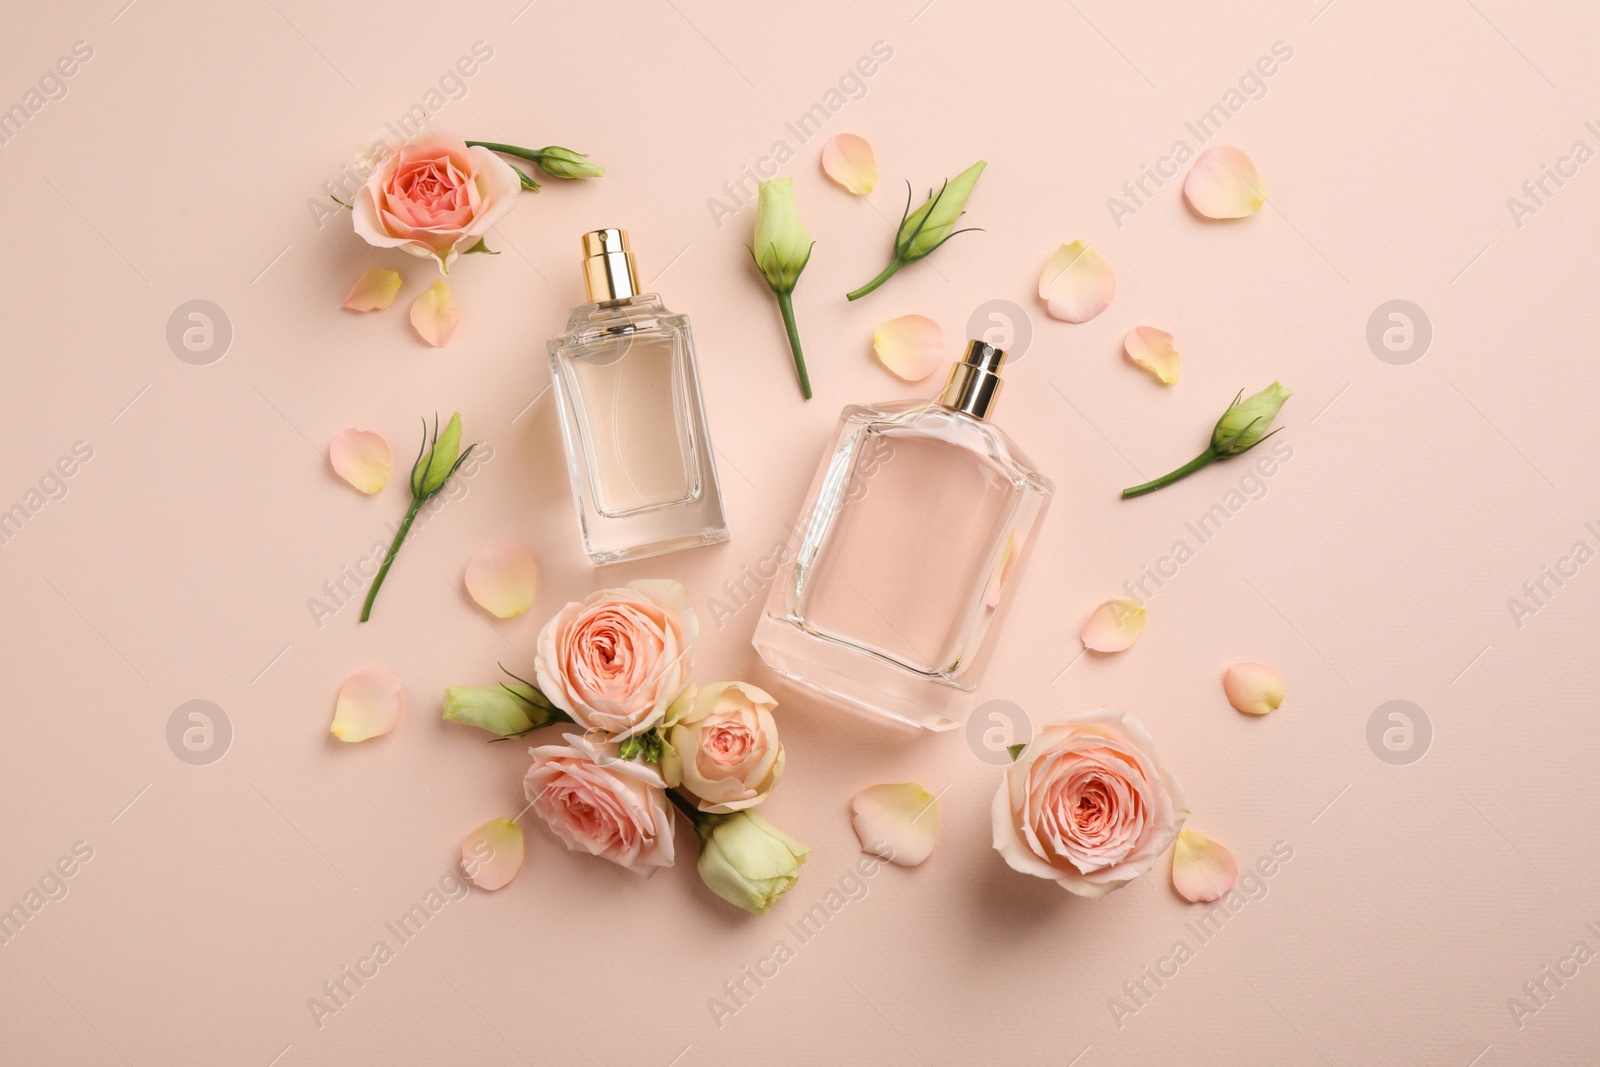 Photo of Flat lay composition with different perfume bottles and fresh flowers on beige background